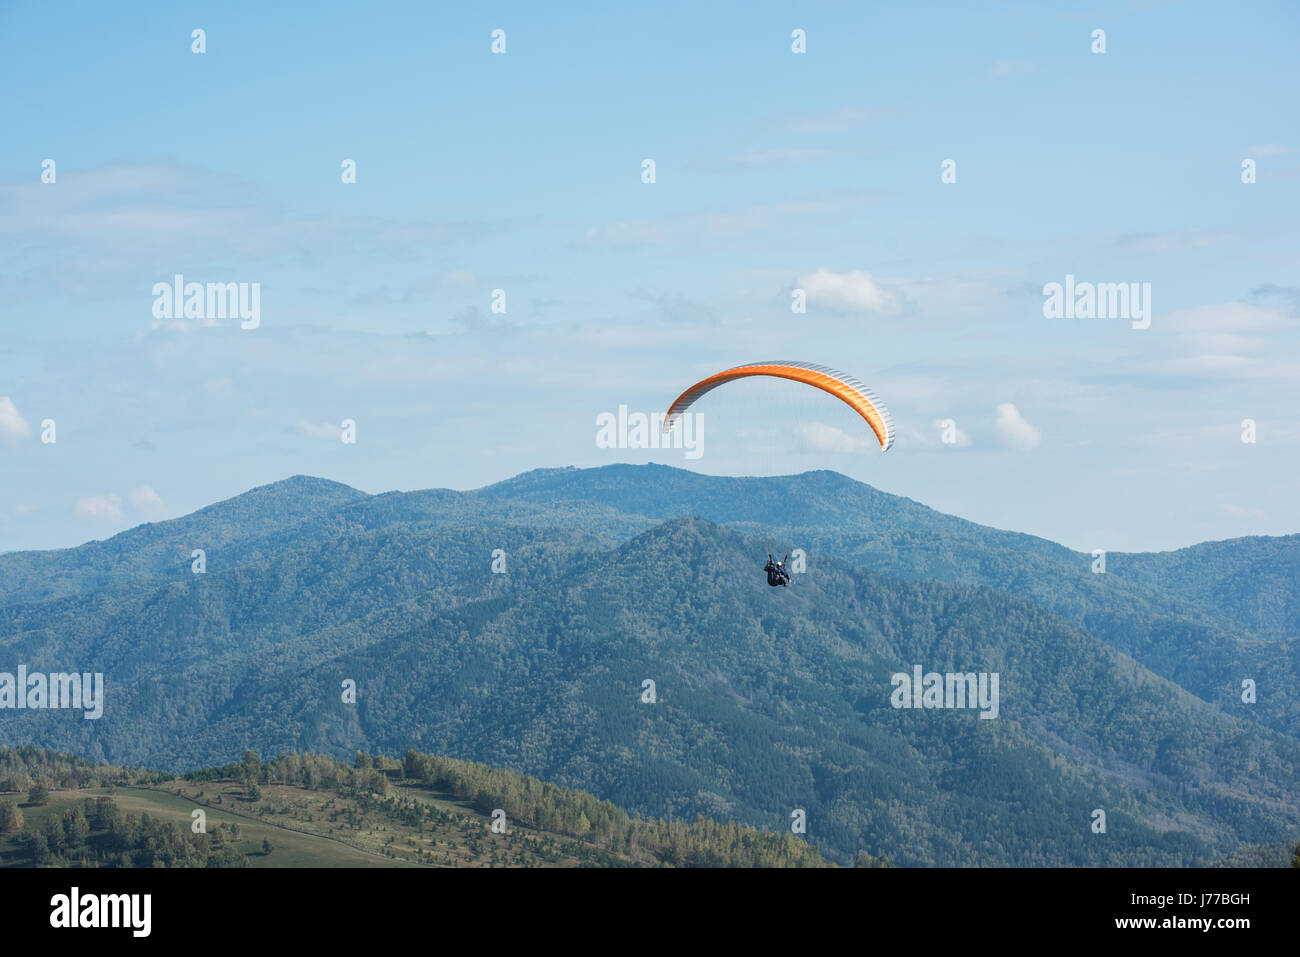 Paragliding in mountains Stock Photo